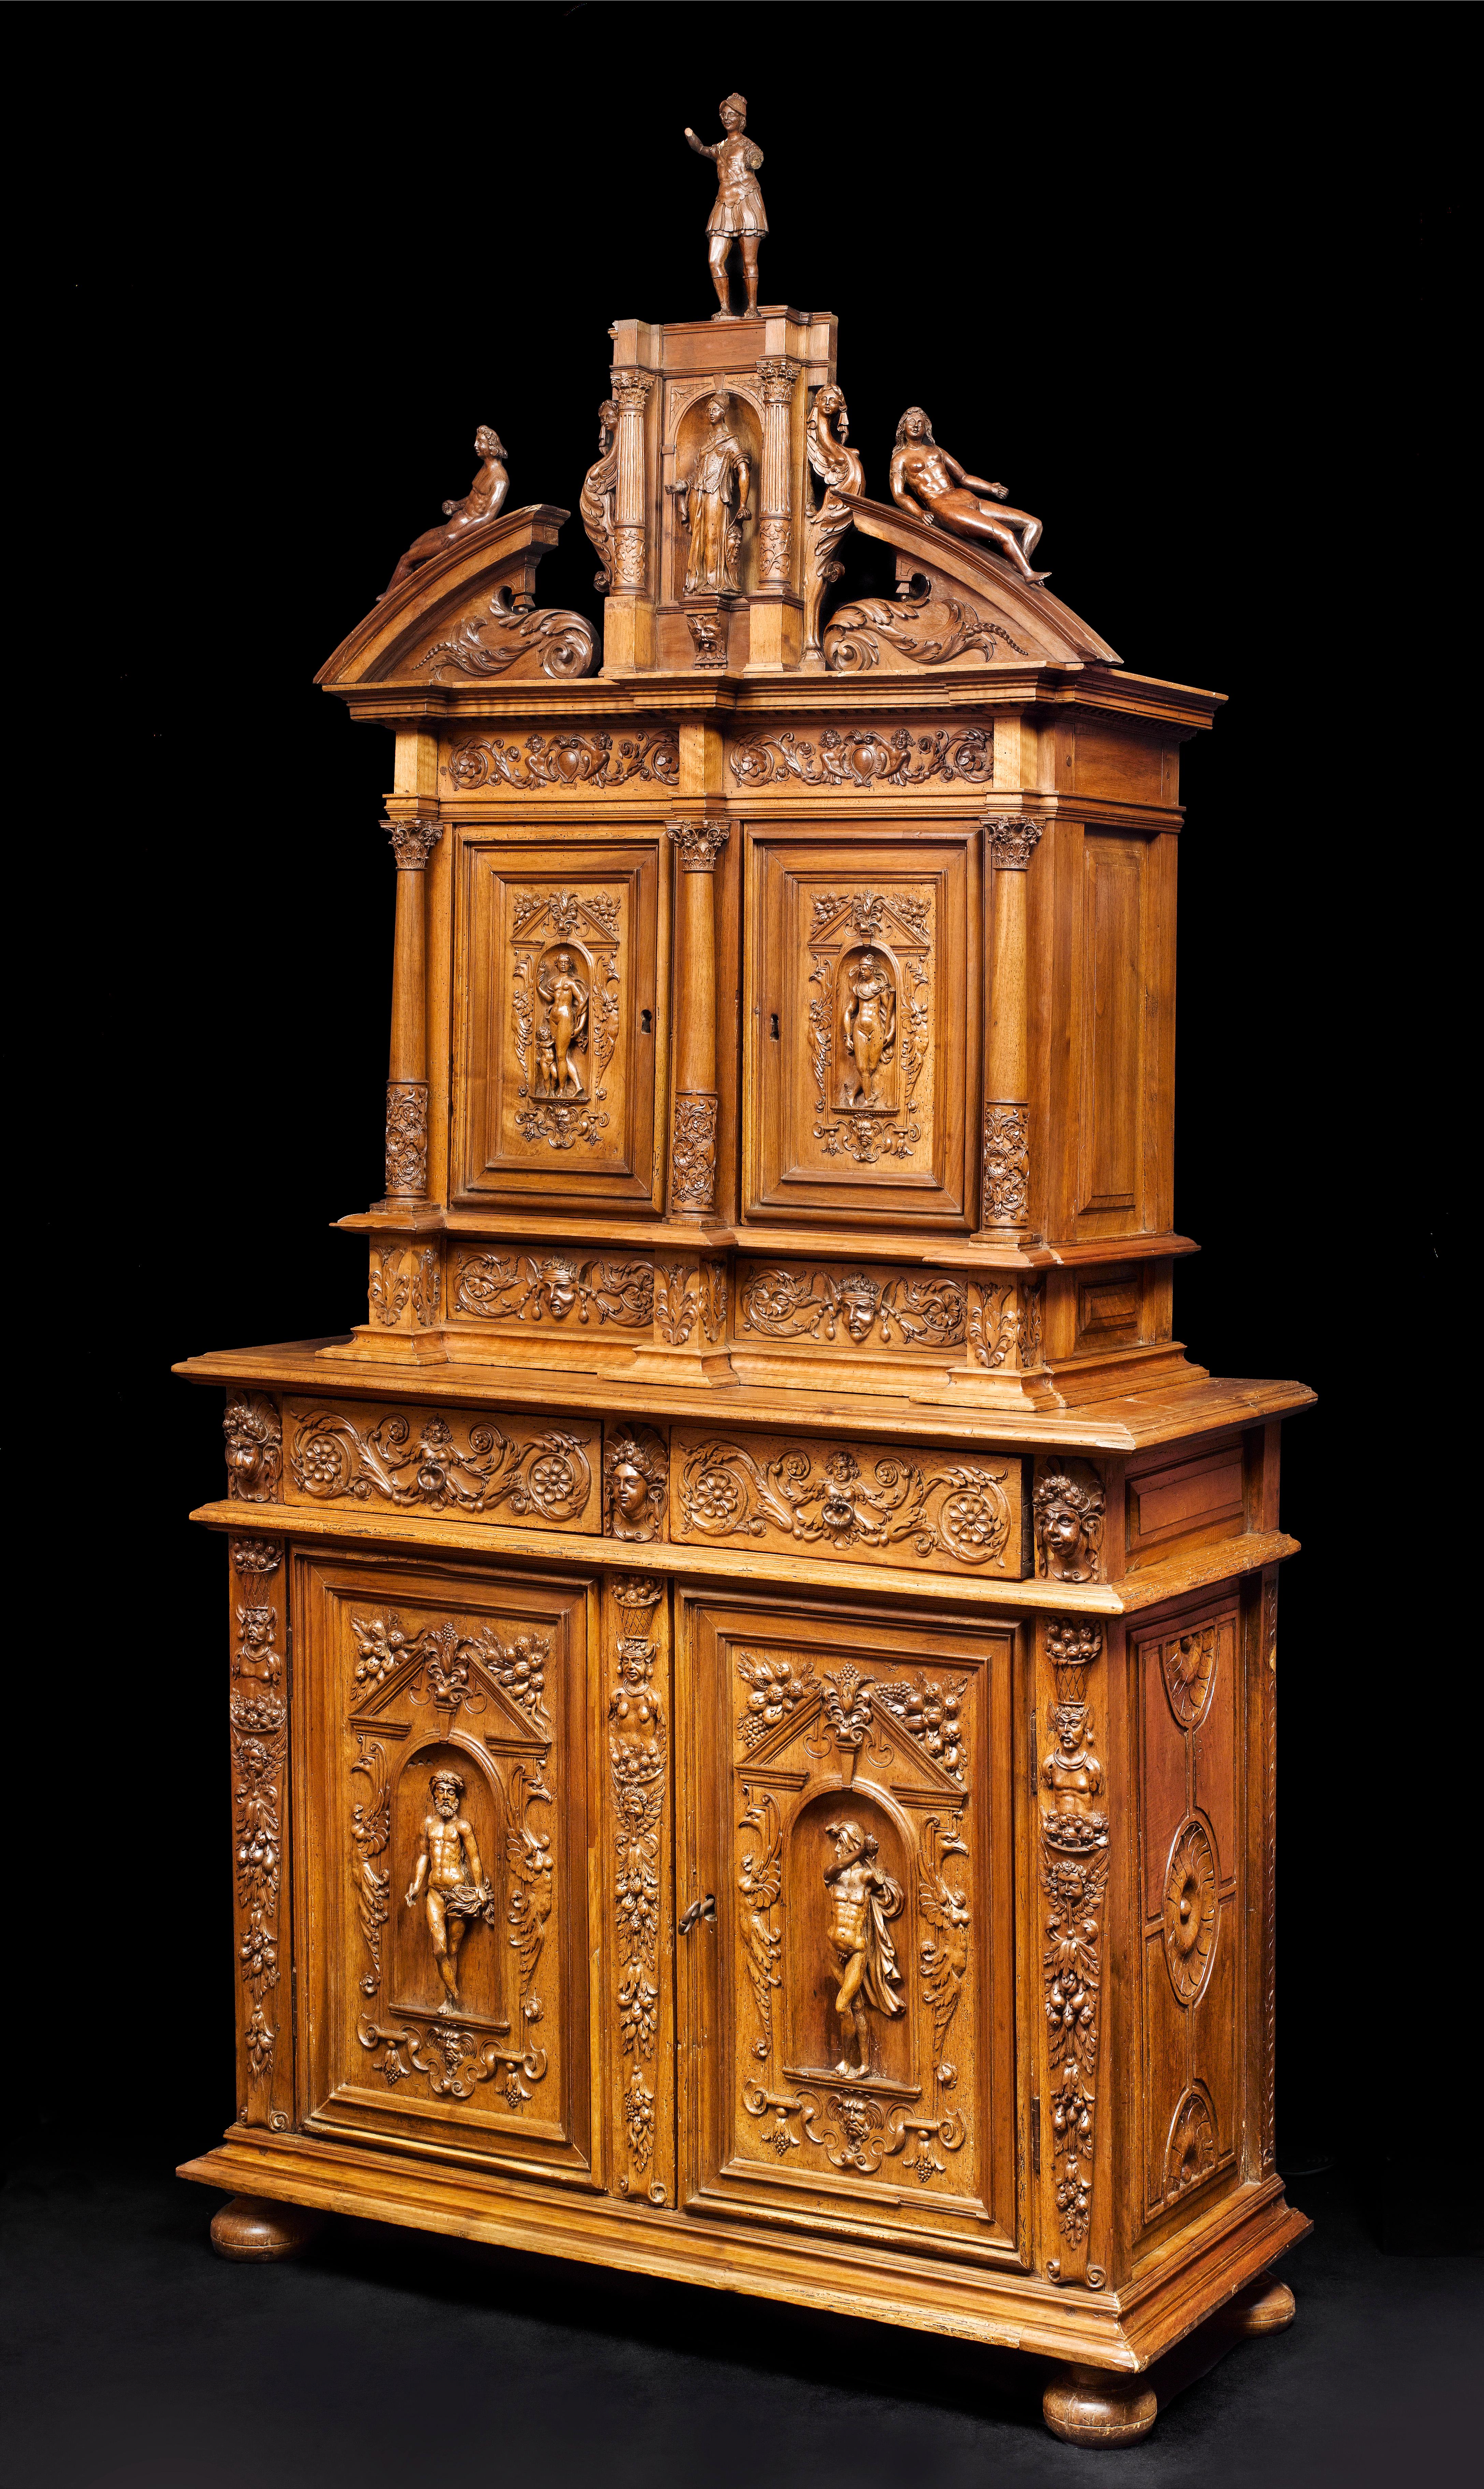 This cabinet is composed of two bodies, the upper one being recessed. The extraordinary proportions are enriched by a mythological and floral carved decor.

The Lower body stands on a moulded base with four bun-feet. It opens thanks to two